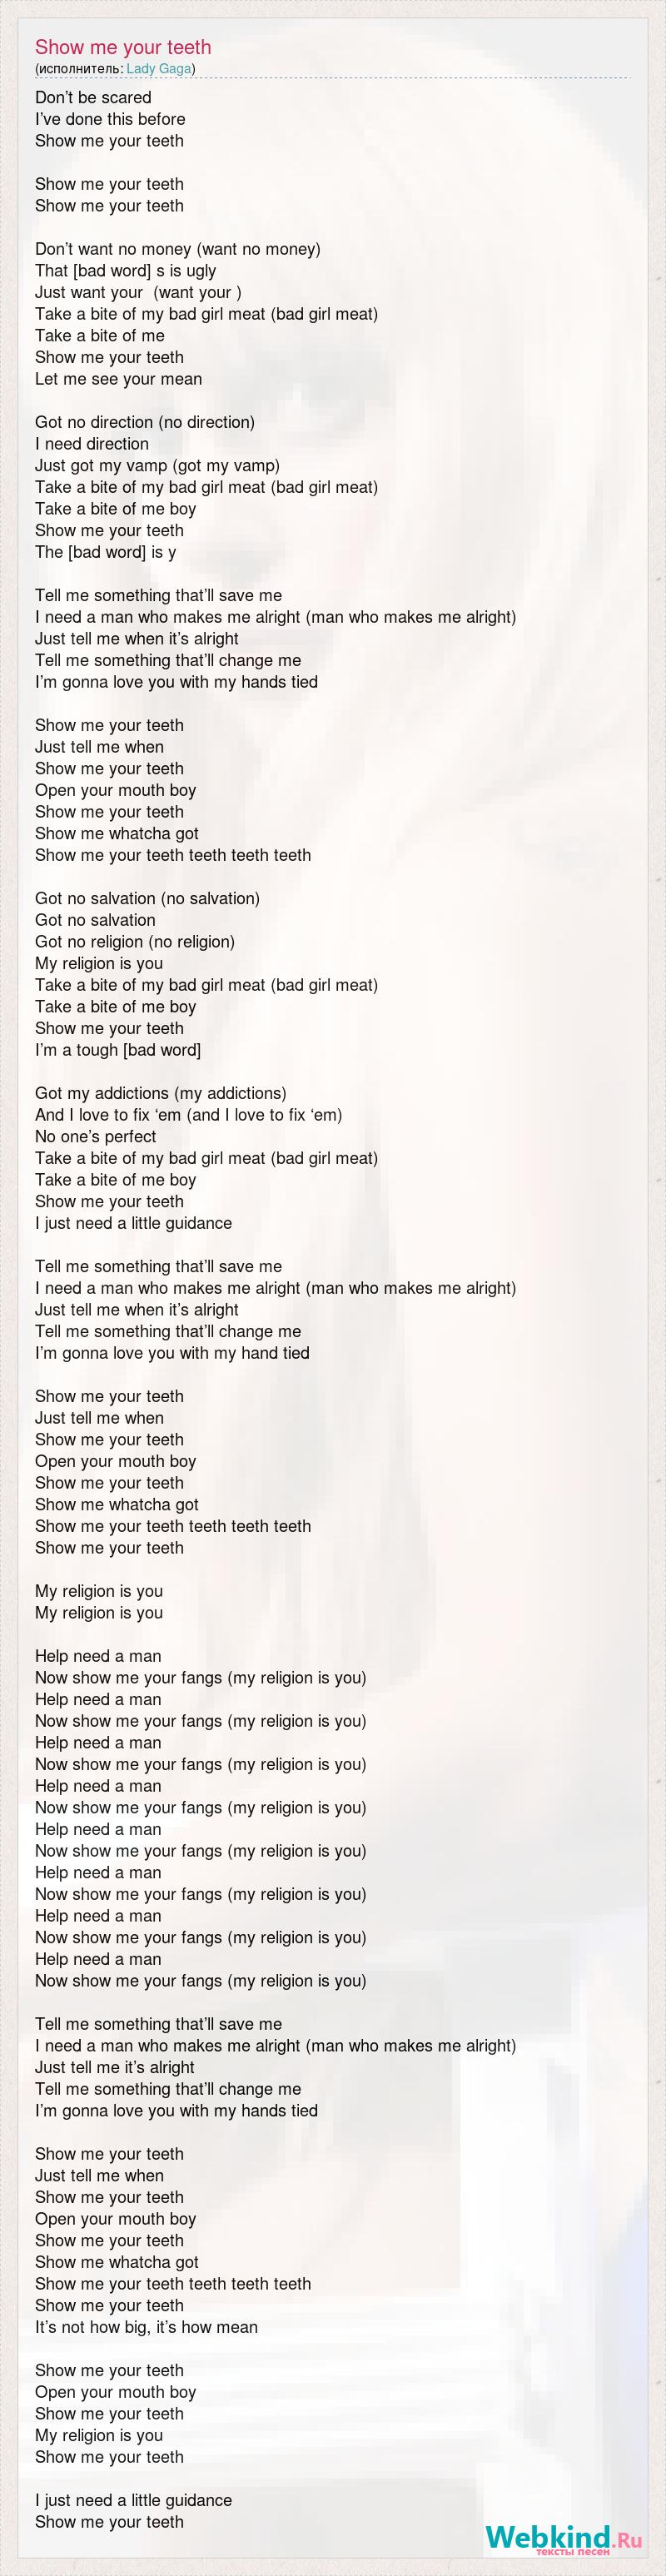 song lyrics for show me your teeth